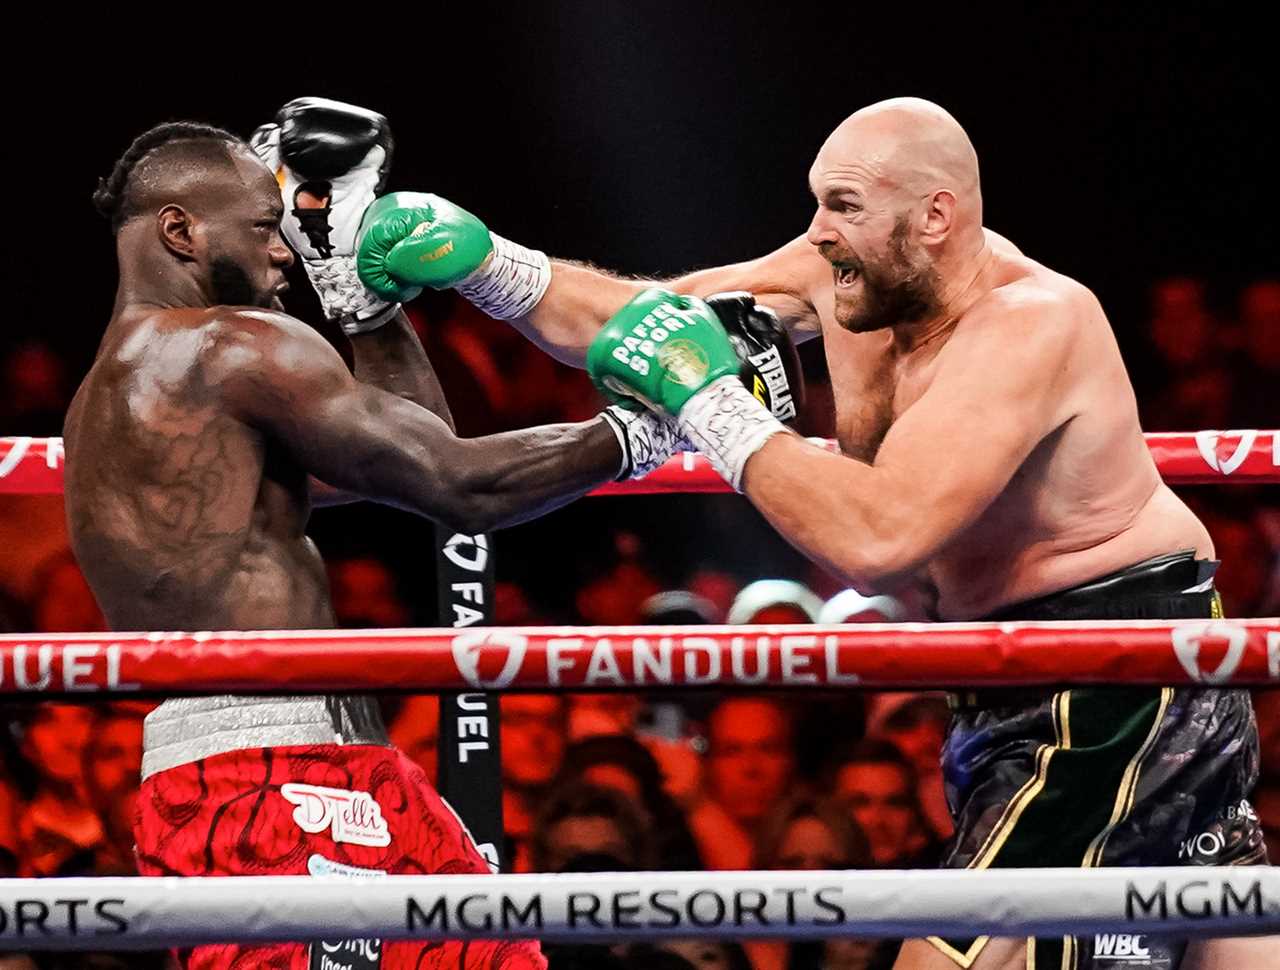 After a heated trilogy of brutal fights, Deontay Wilder says he and Tyson Fury won't be friends